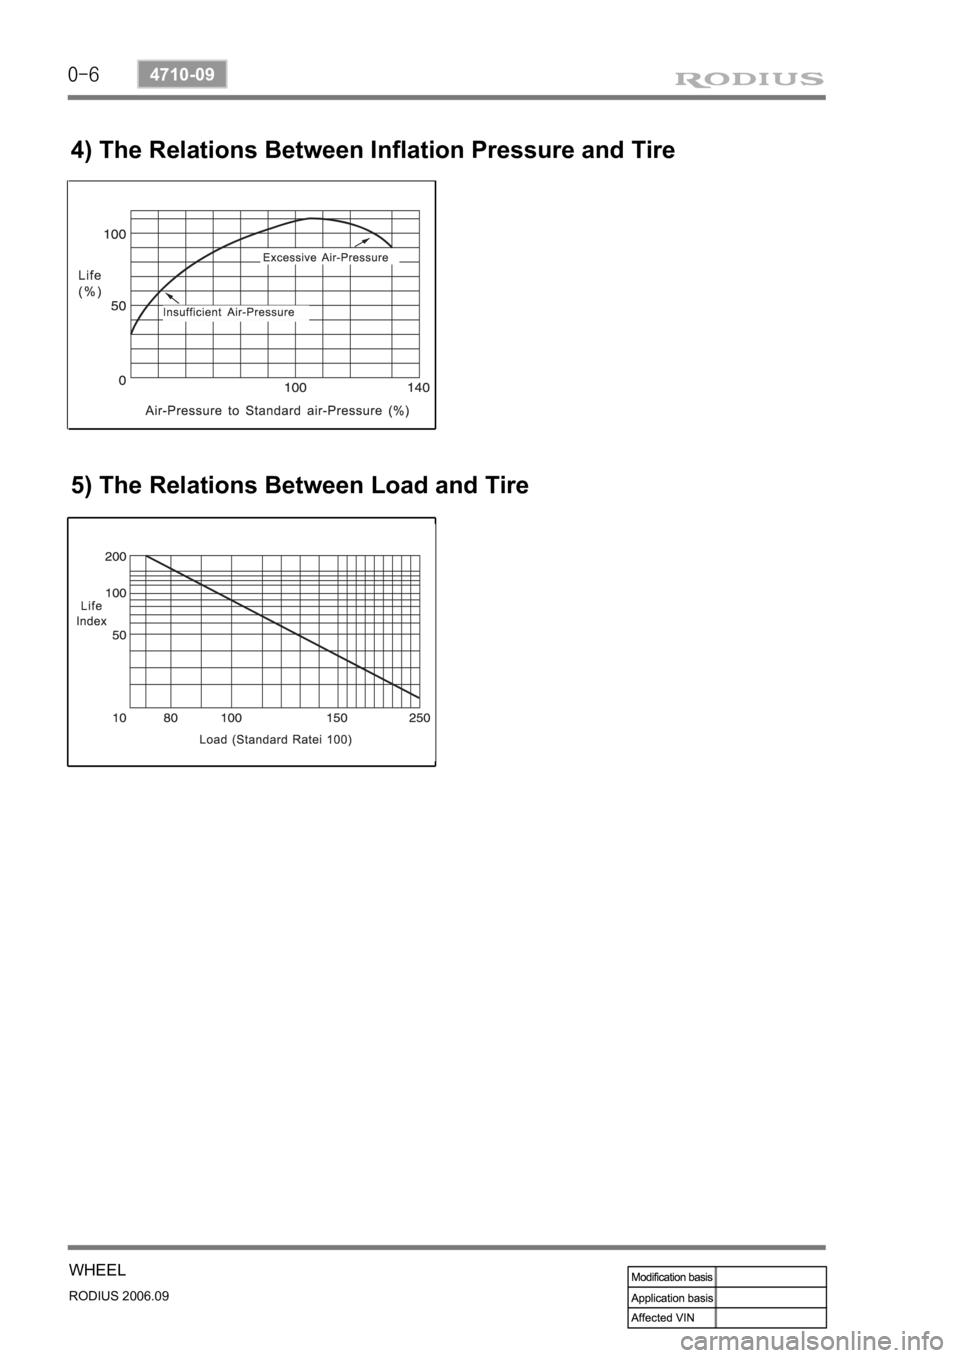 SSANGYONG RODIUS 2007  Service Manual 0-6
RODIUS 2006.09
4710-09
WHEEL 
4) The Relations Between Inflation Pressure and Tire
5) The Relations Between Load and Tire 